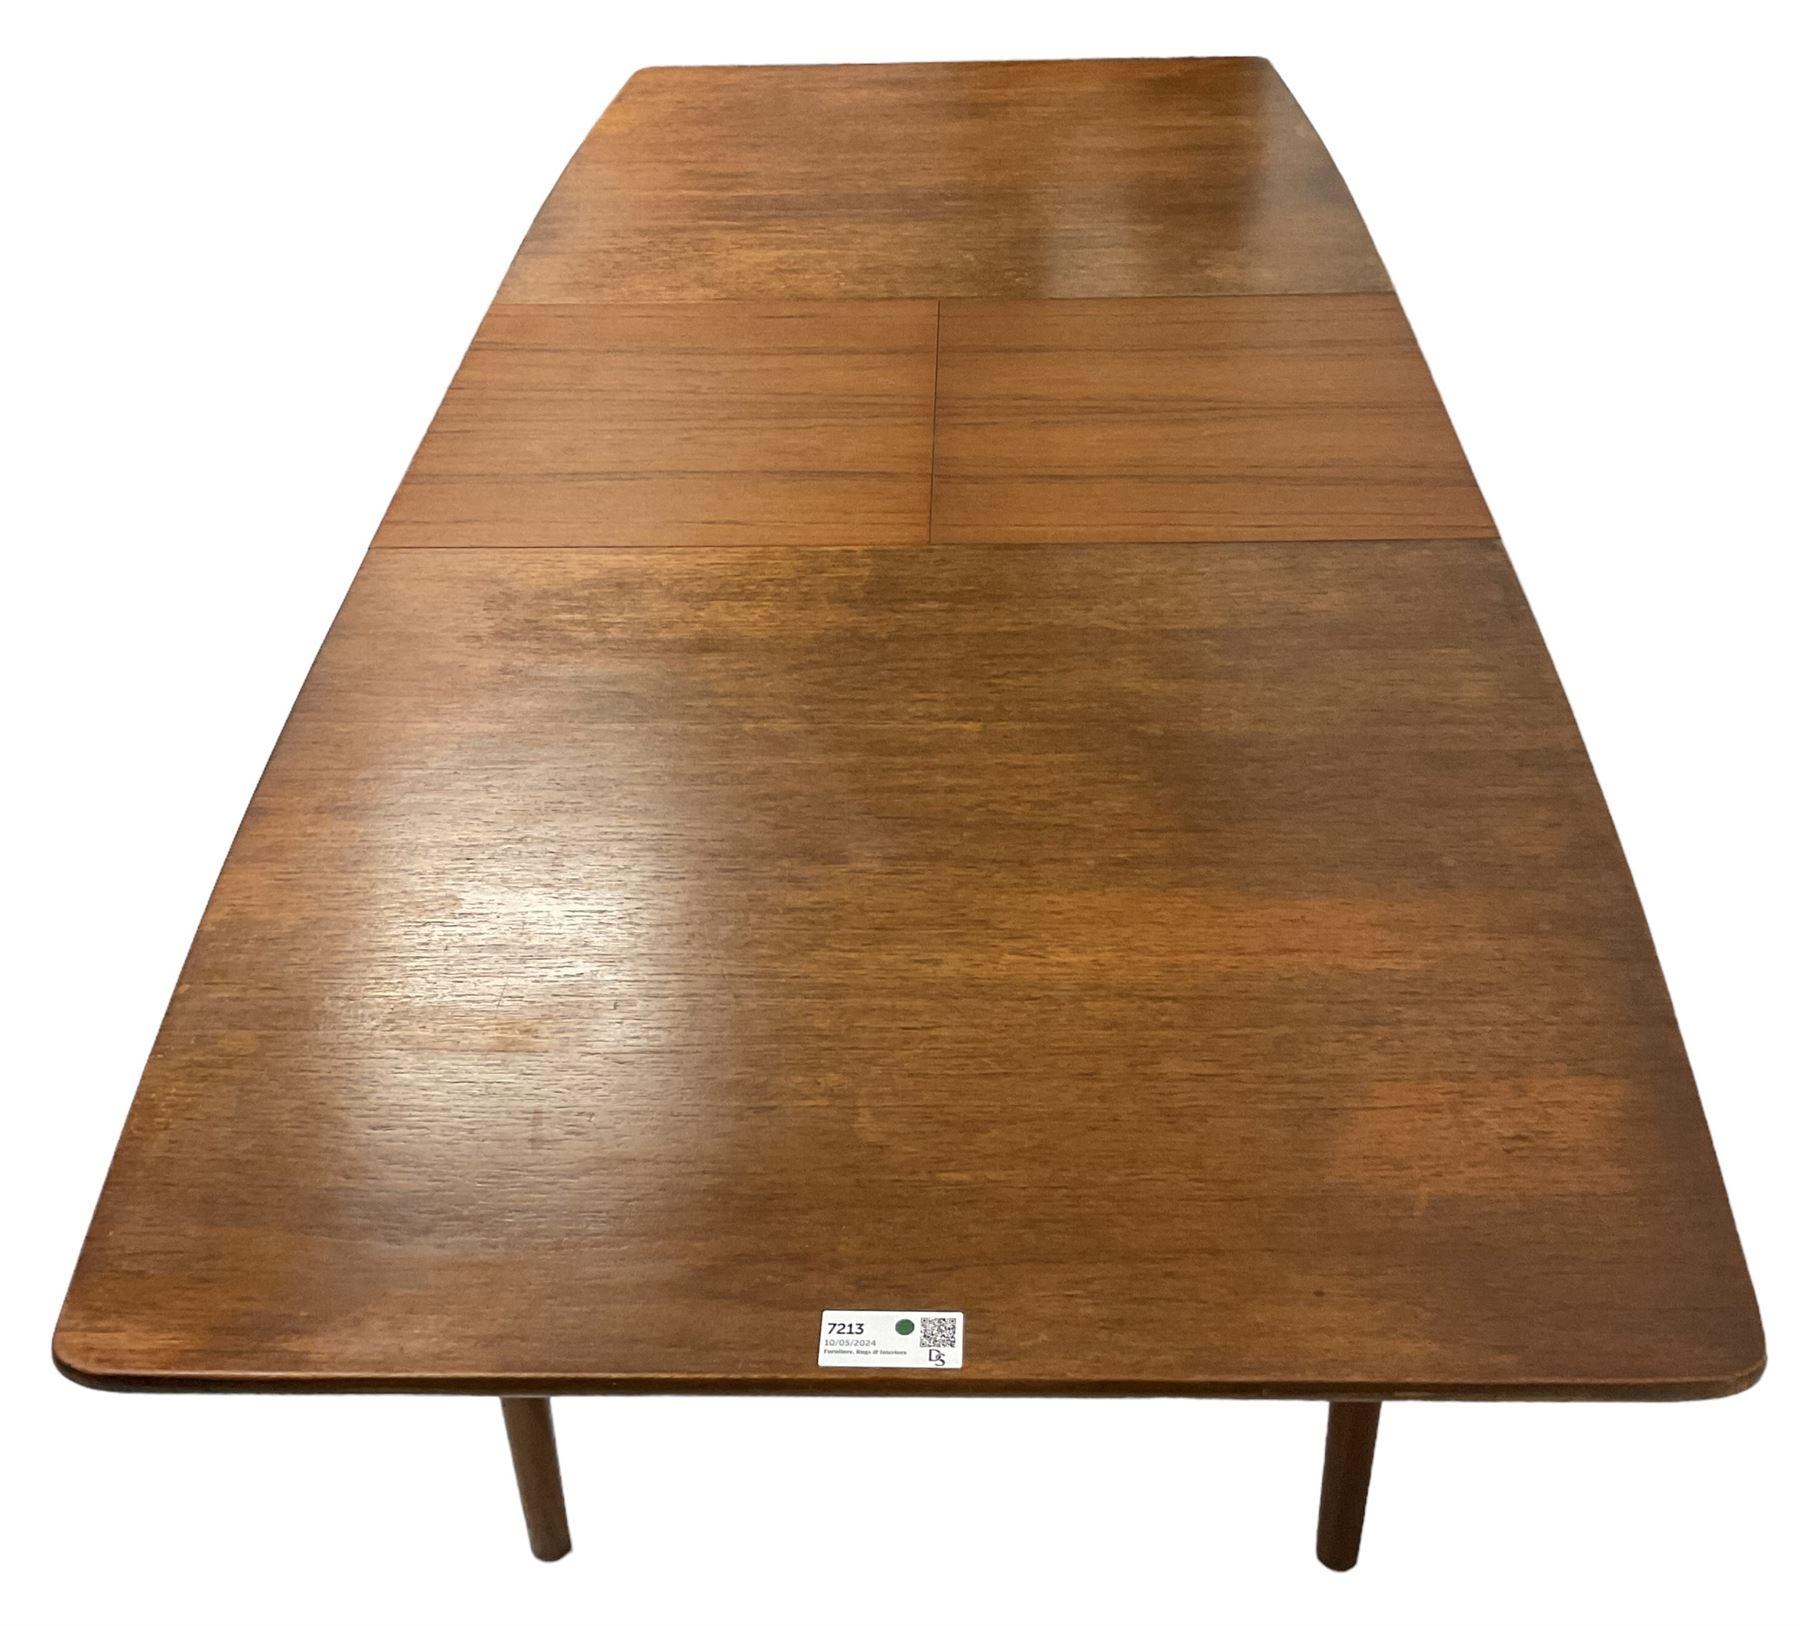 Tom Robertson for AH McIntosh & Co of Kirkaldy - mid-20th century teak extending dining table - Image 8 of 19